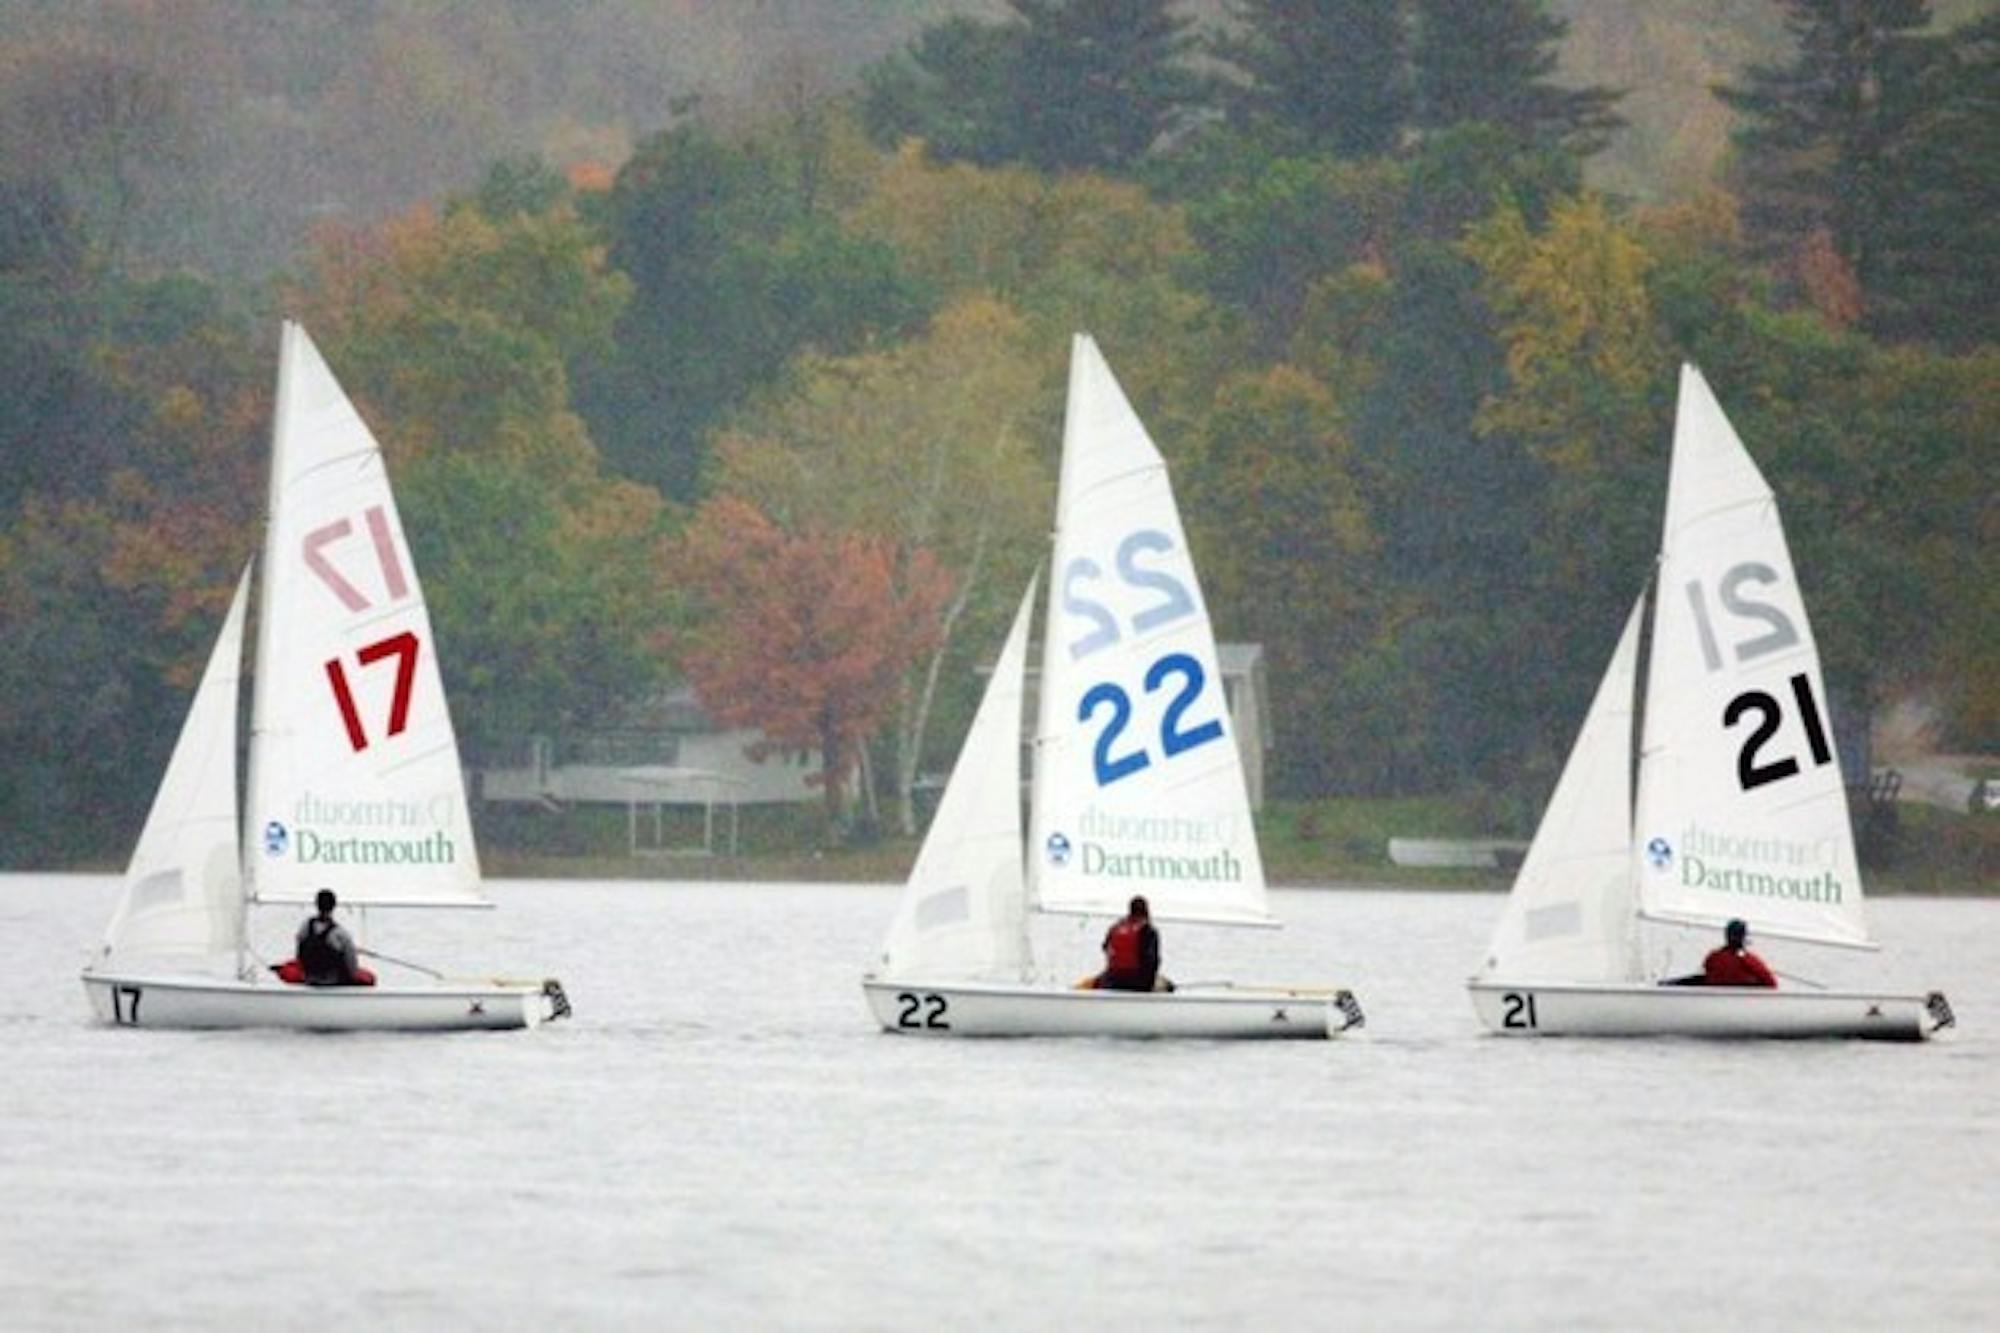 After a relaxing weekend at MIT, the sailing team will next head to Brown for the New England Championships.